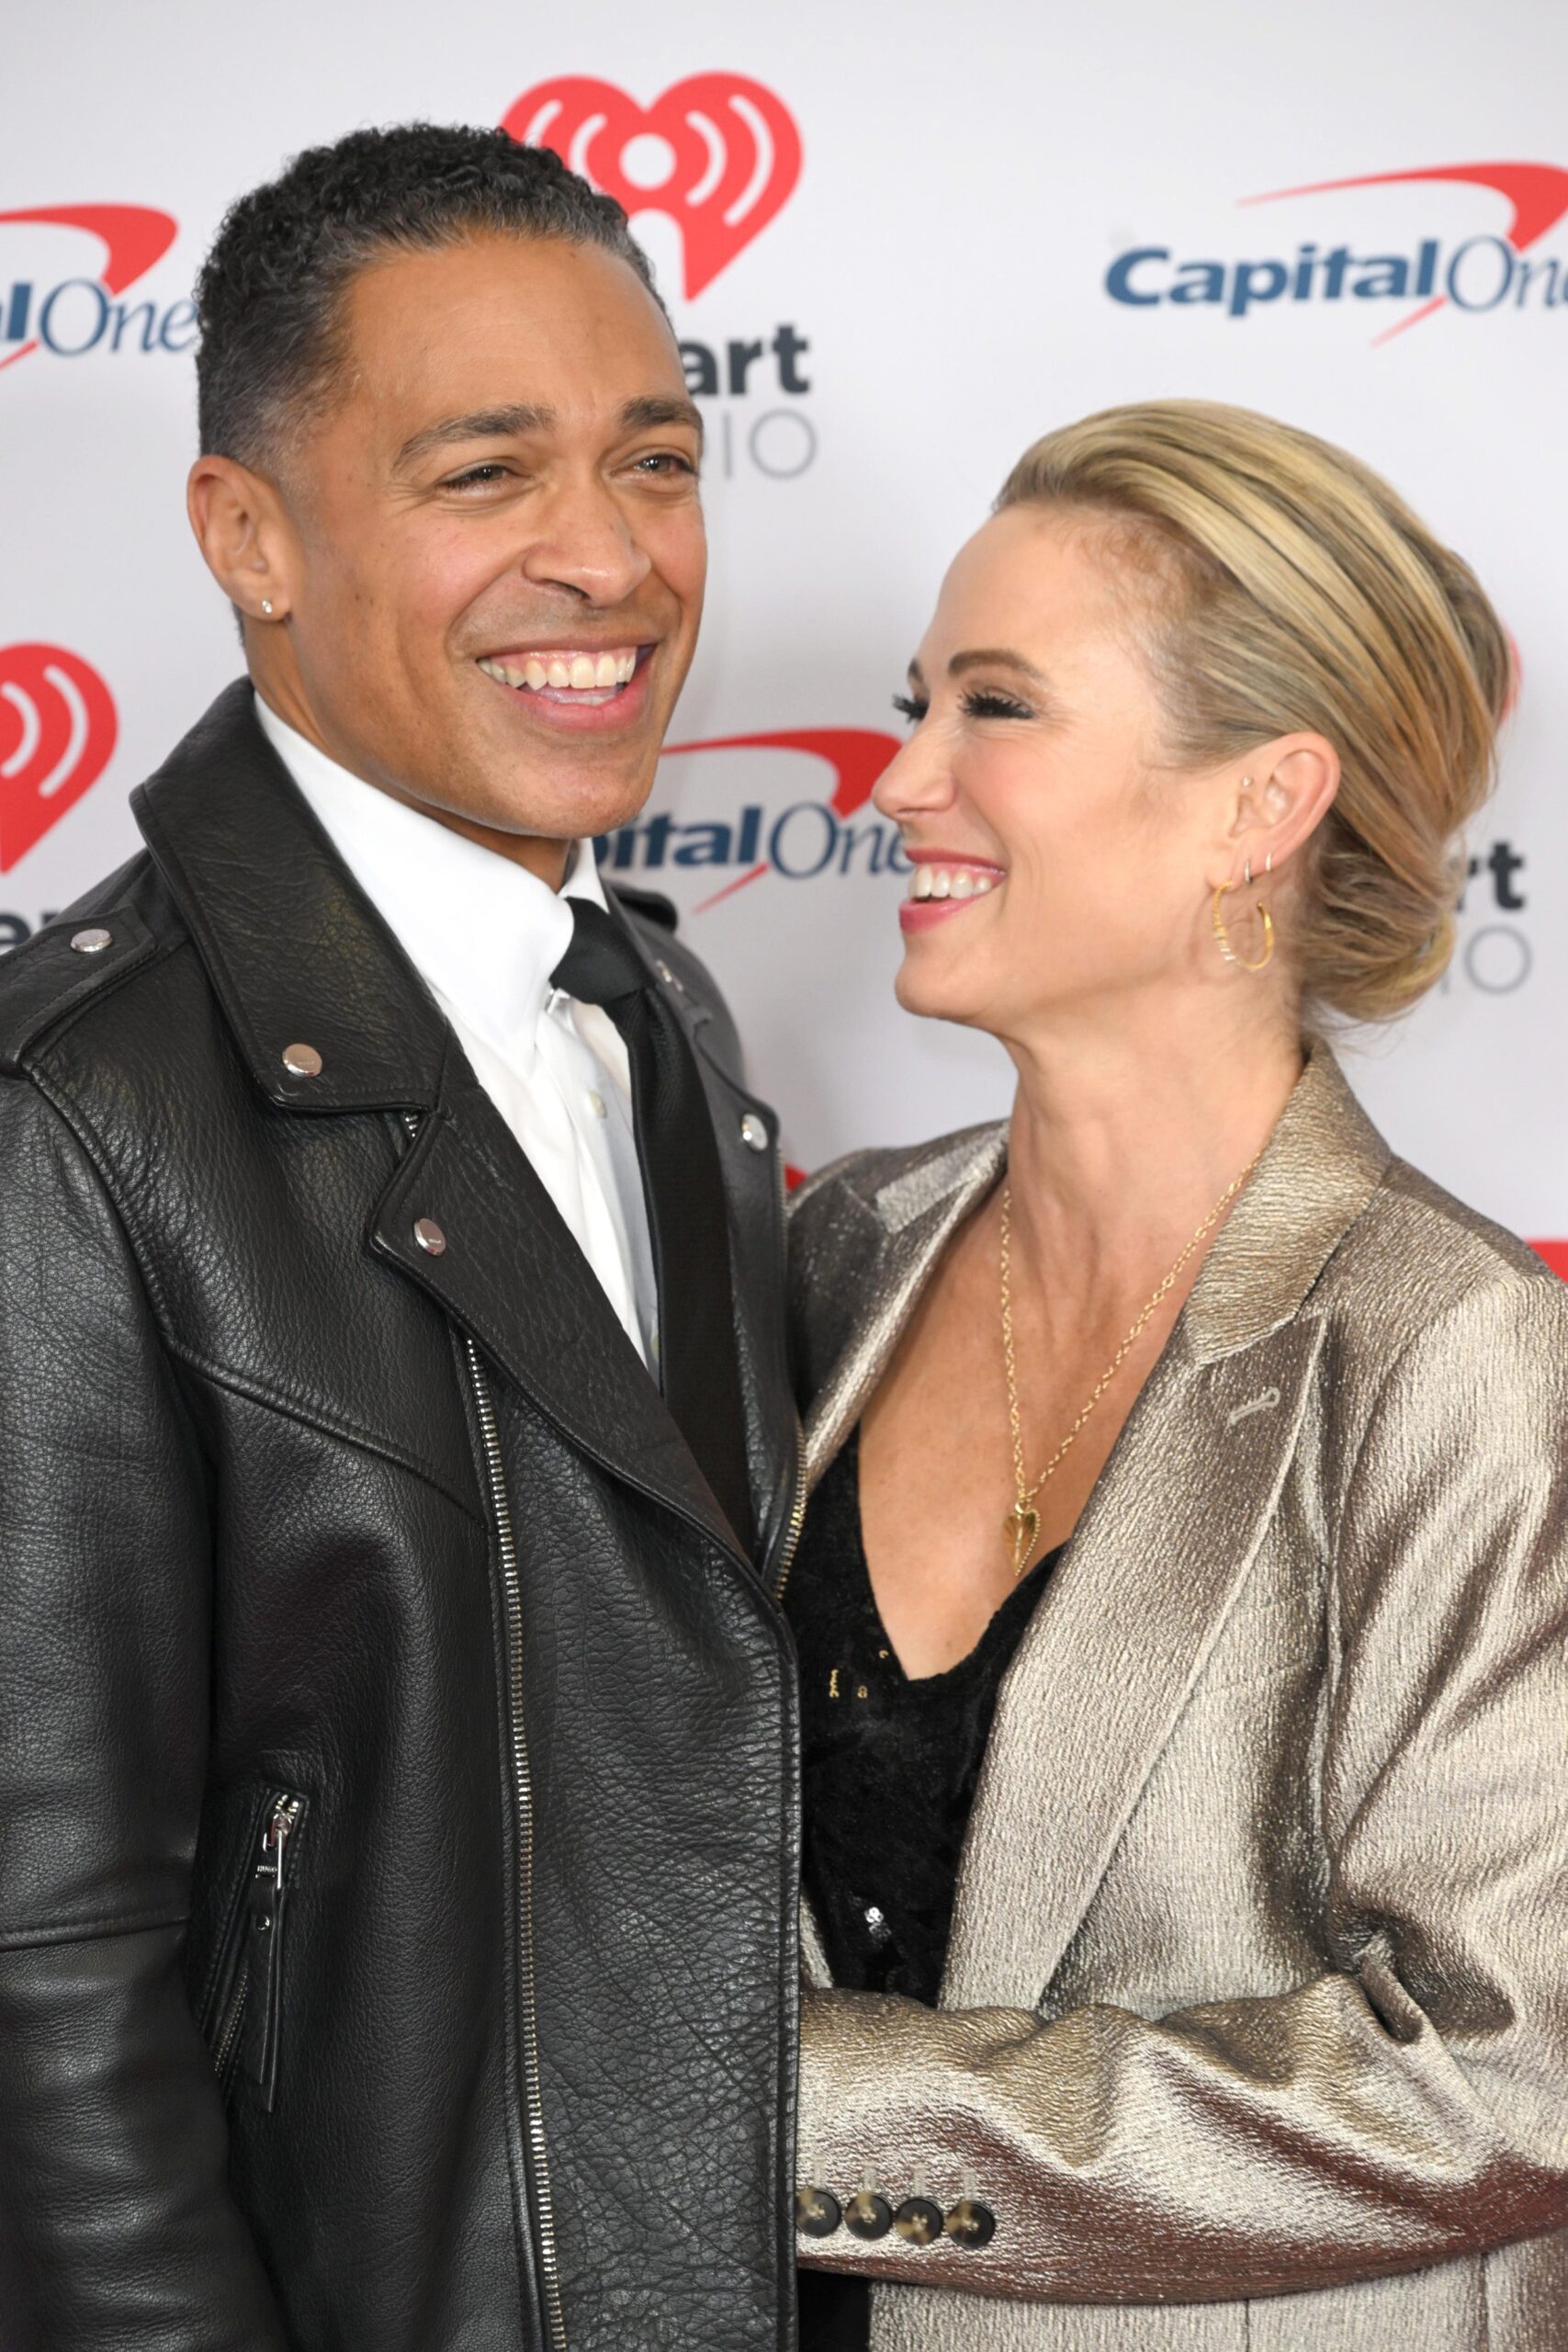 NEW YORK, NEW YORK - DECEMBER 08: (L-R) T. J. Holmes and Amy Robach attend iHeartRadio z100's Jingle Ball 2023 Presented By Capital One at Madison Square Garden on December 08, 2023 in New York City. (Photo by Dave Kotinsky/Getty Images for iHeartRadio)